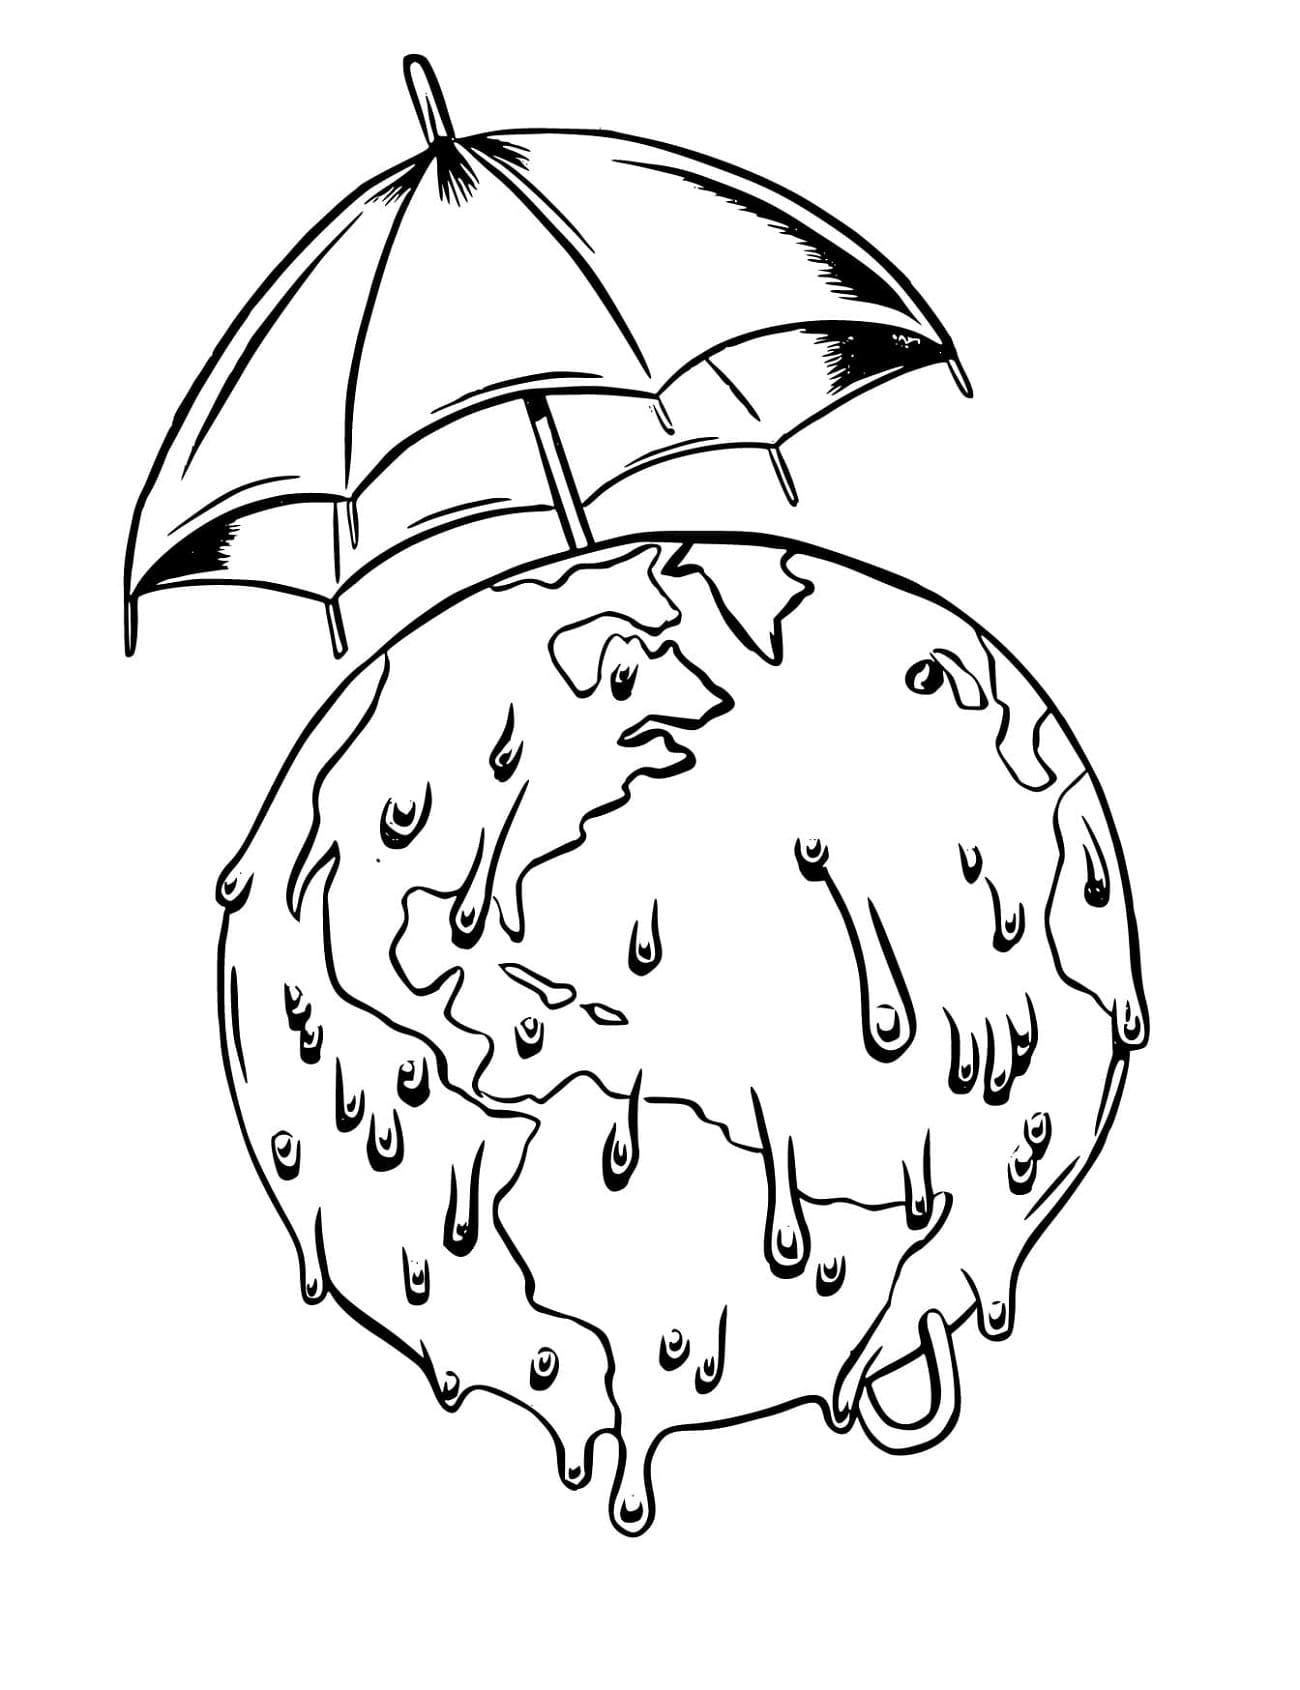 Printable Drawing of Global Warming Coloring Page